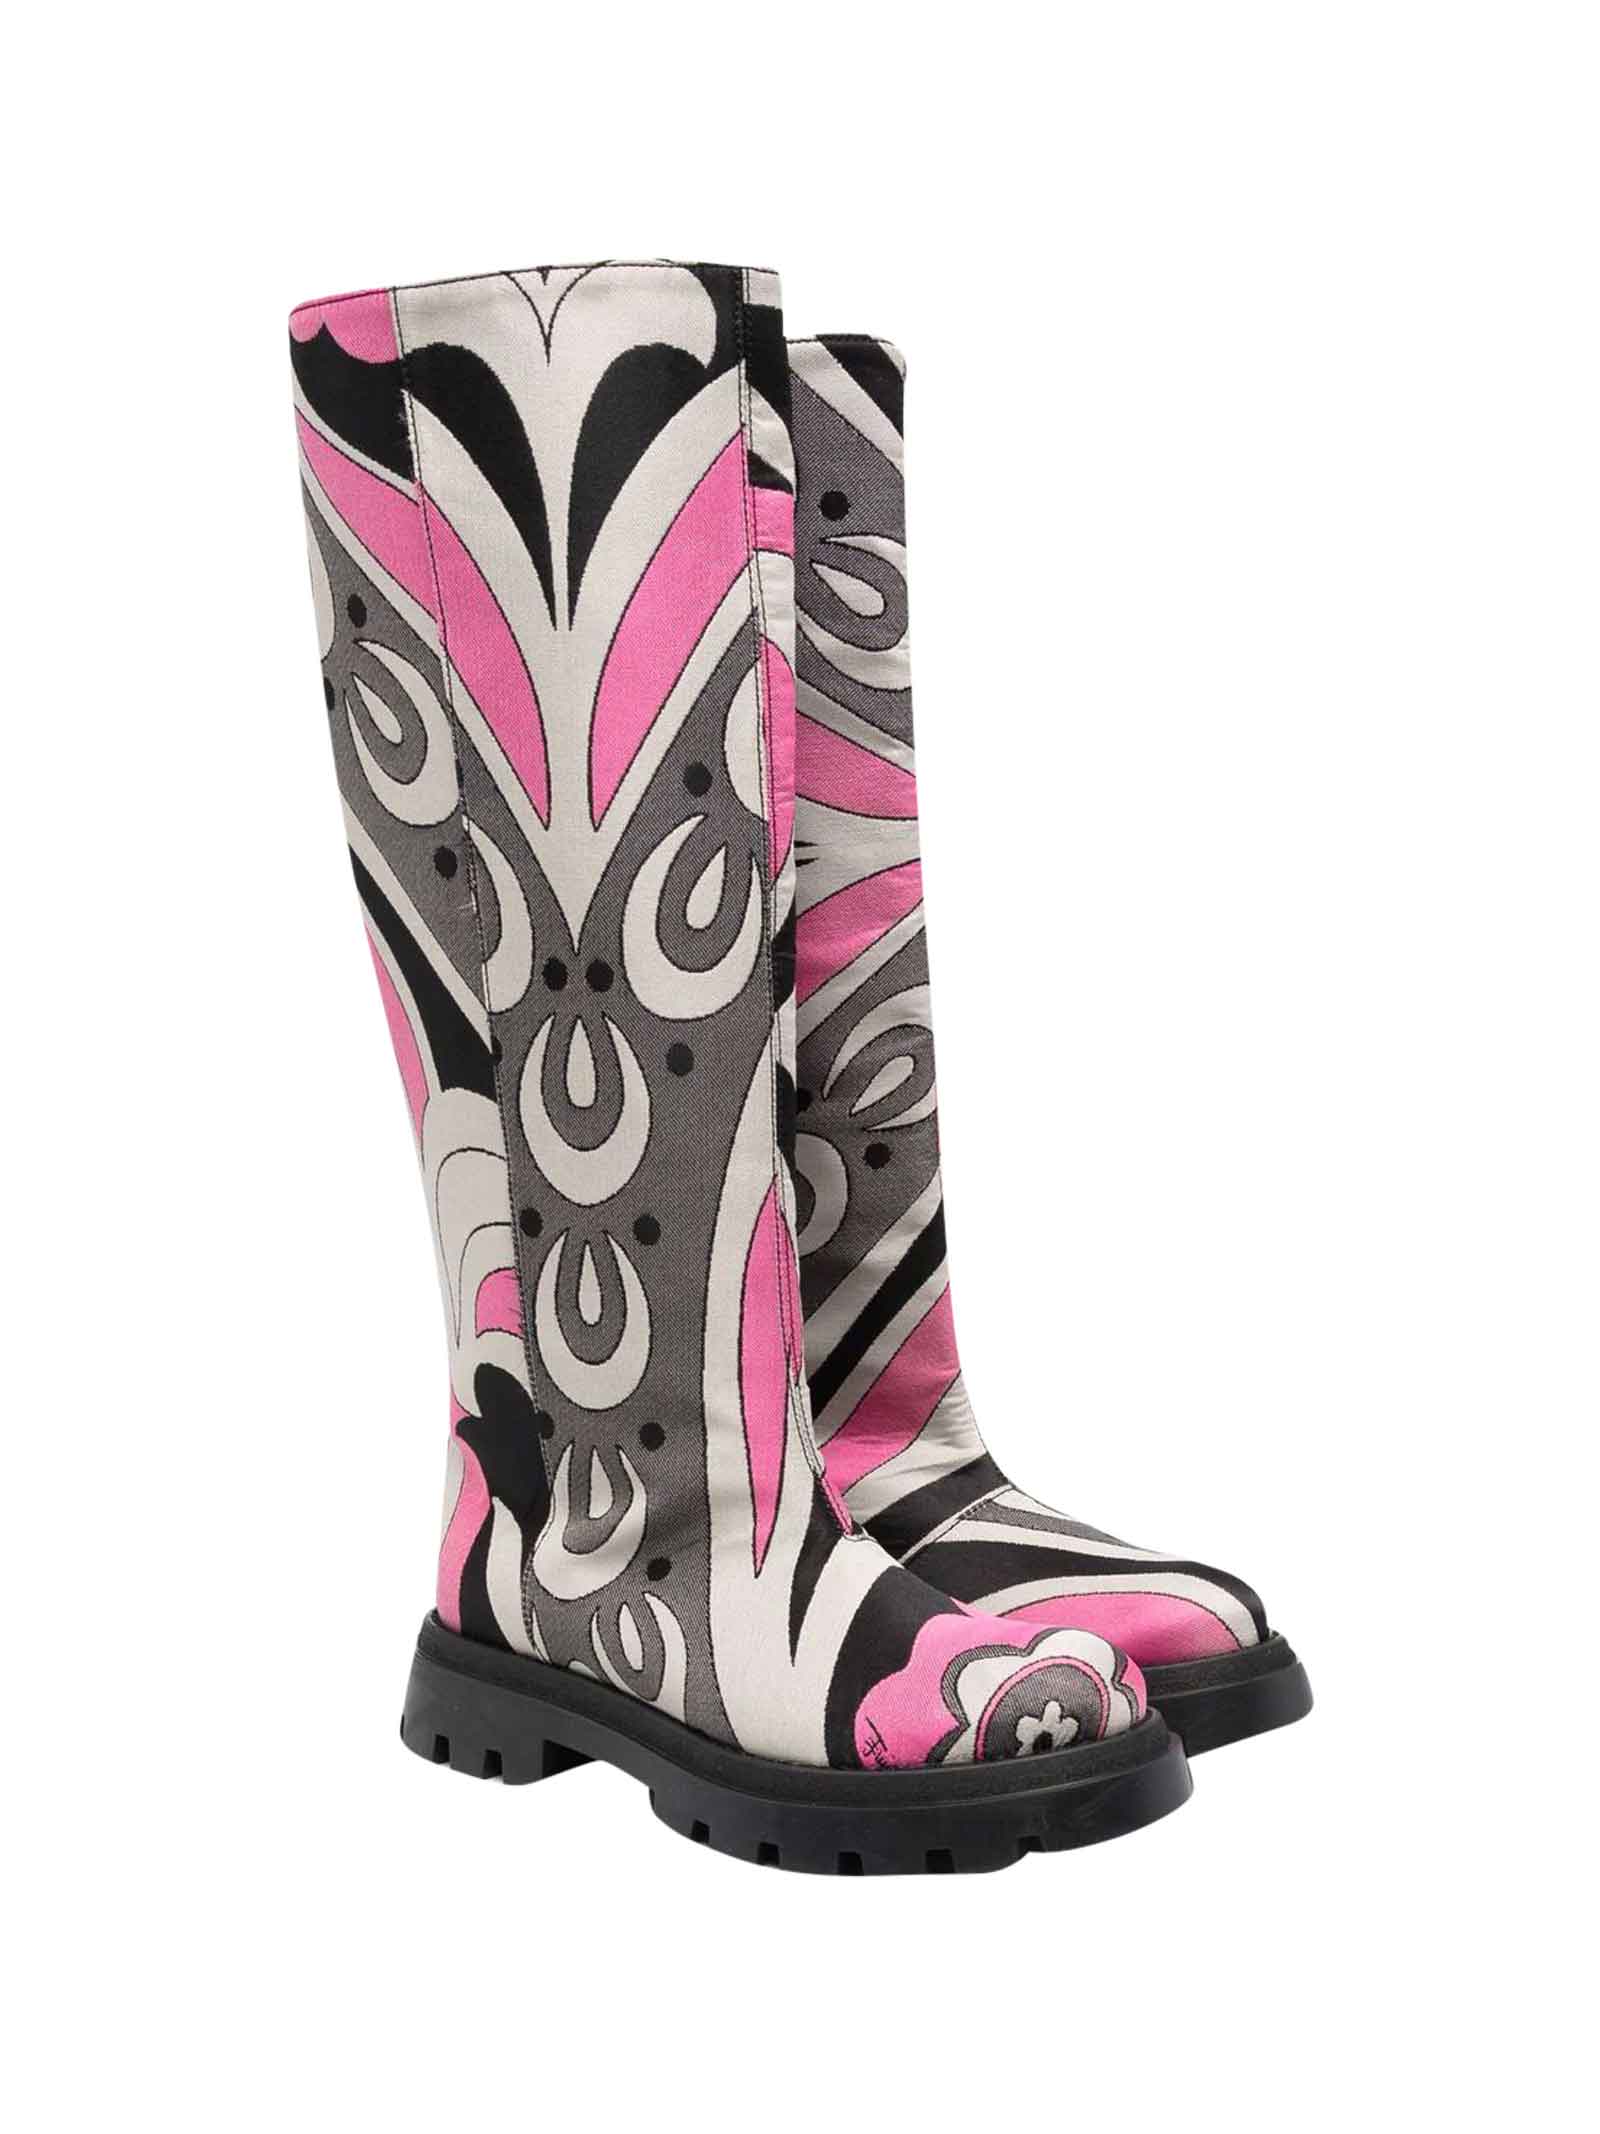 Emilio Pucci Boots With Print